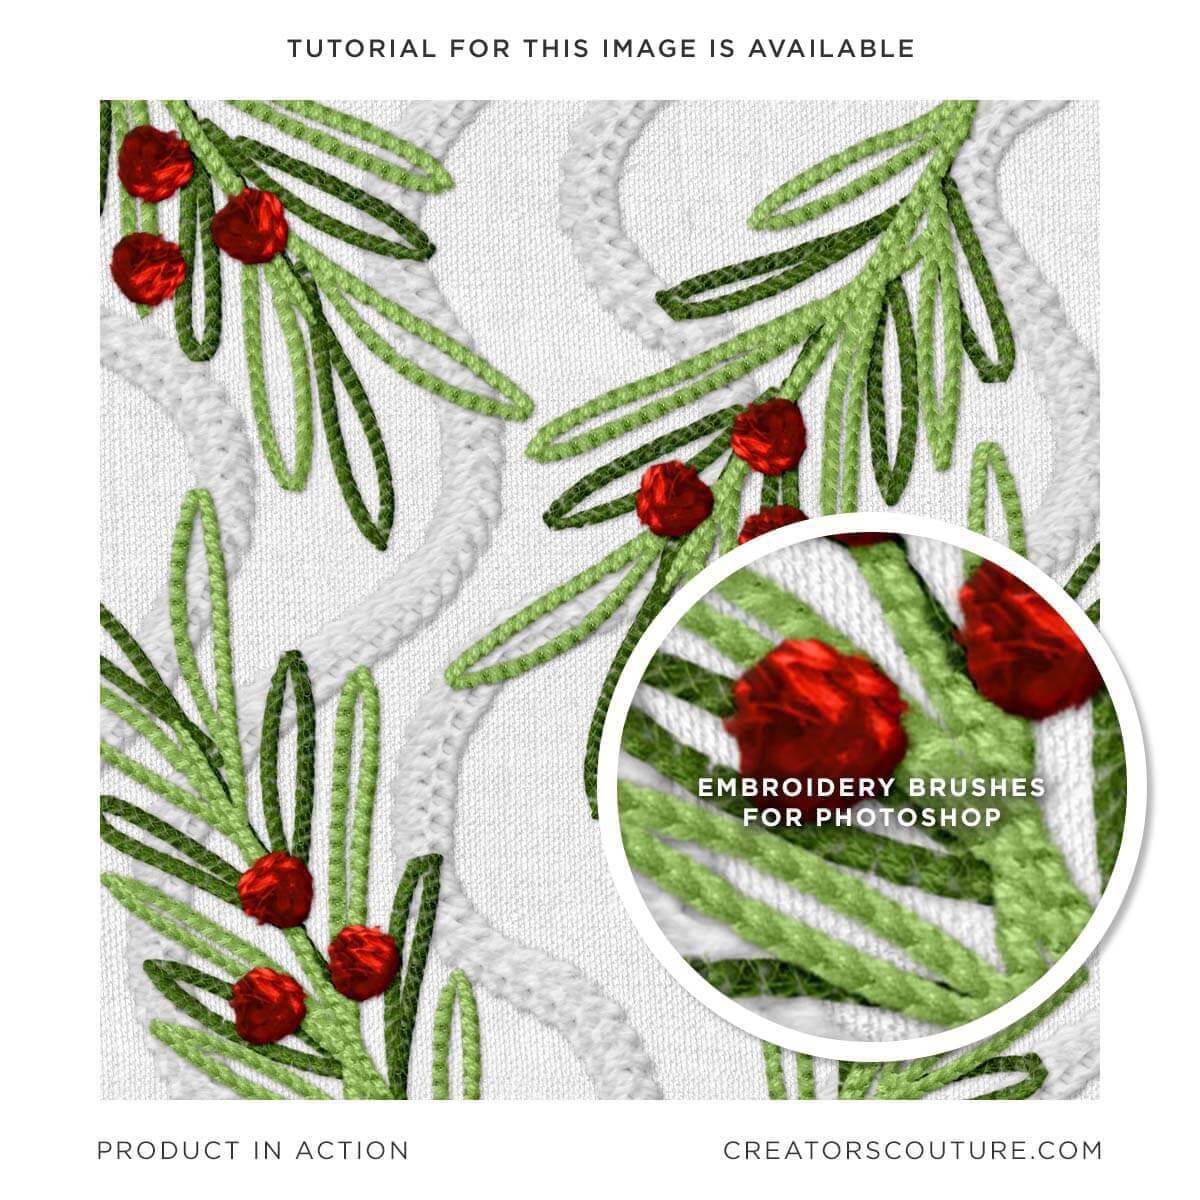 Illustrated pattern design in the style of realistic illustration, created in adobe Photoshop using specially designed Photoshop brushes. Illustrated holiday greenery in the style of embroidery over a white background. 